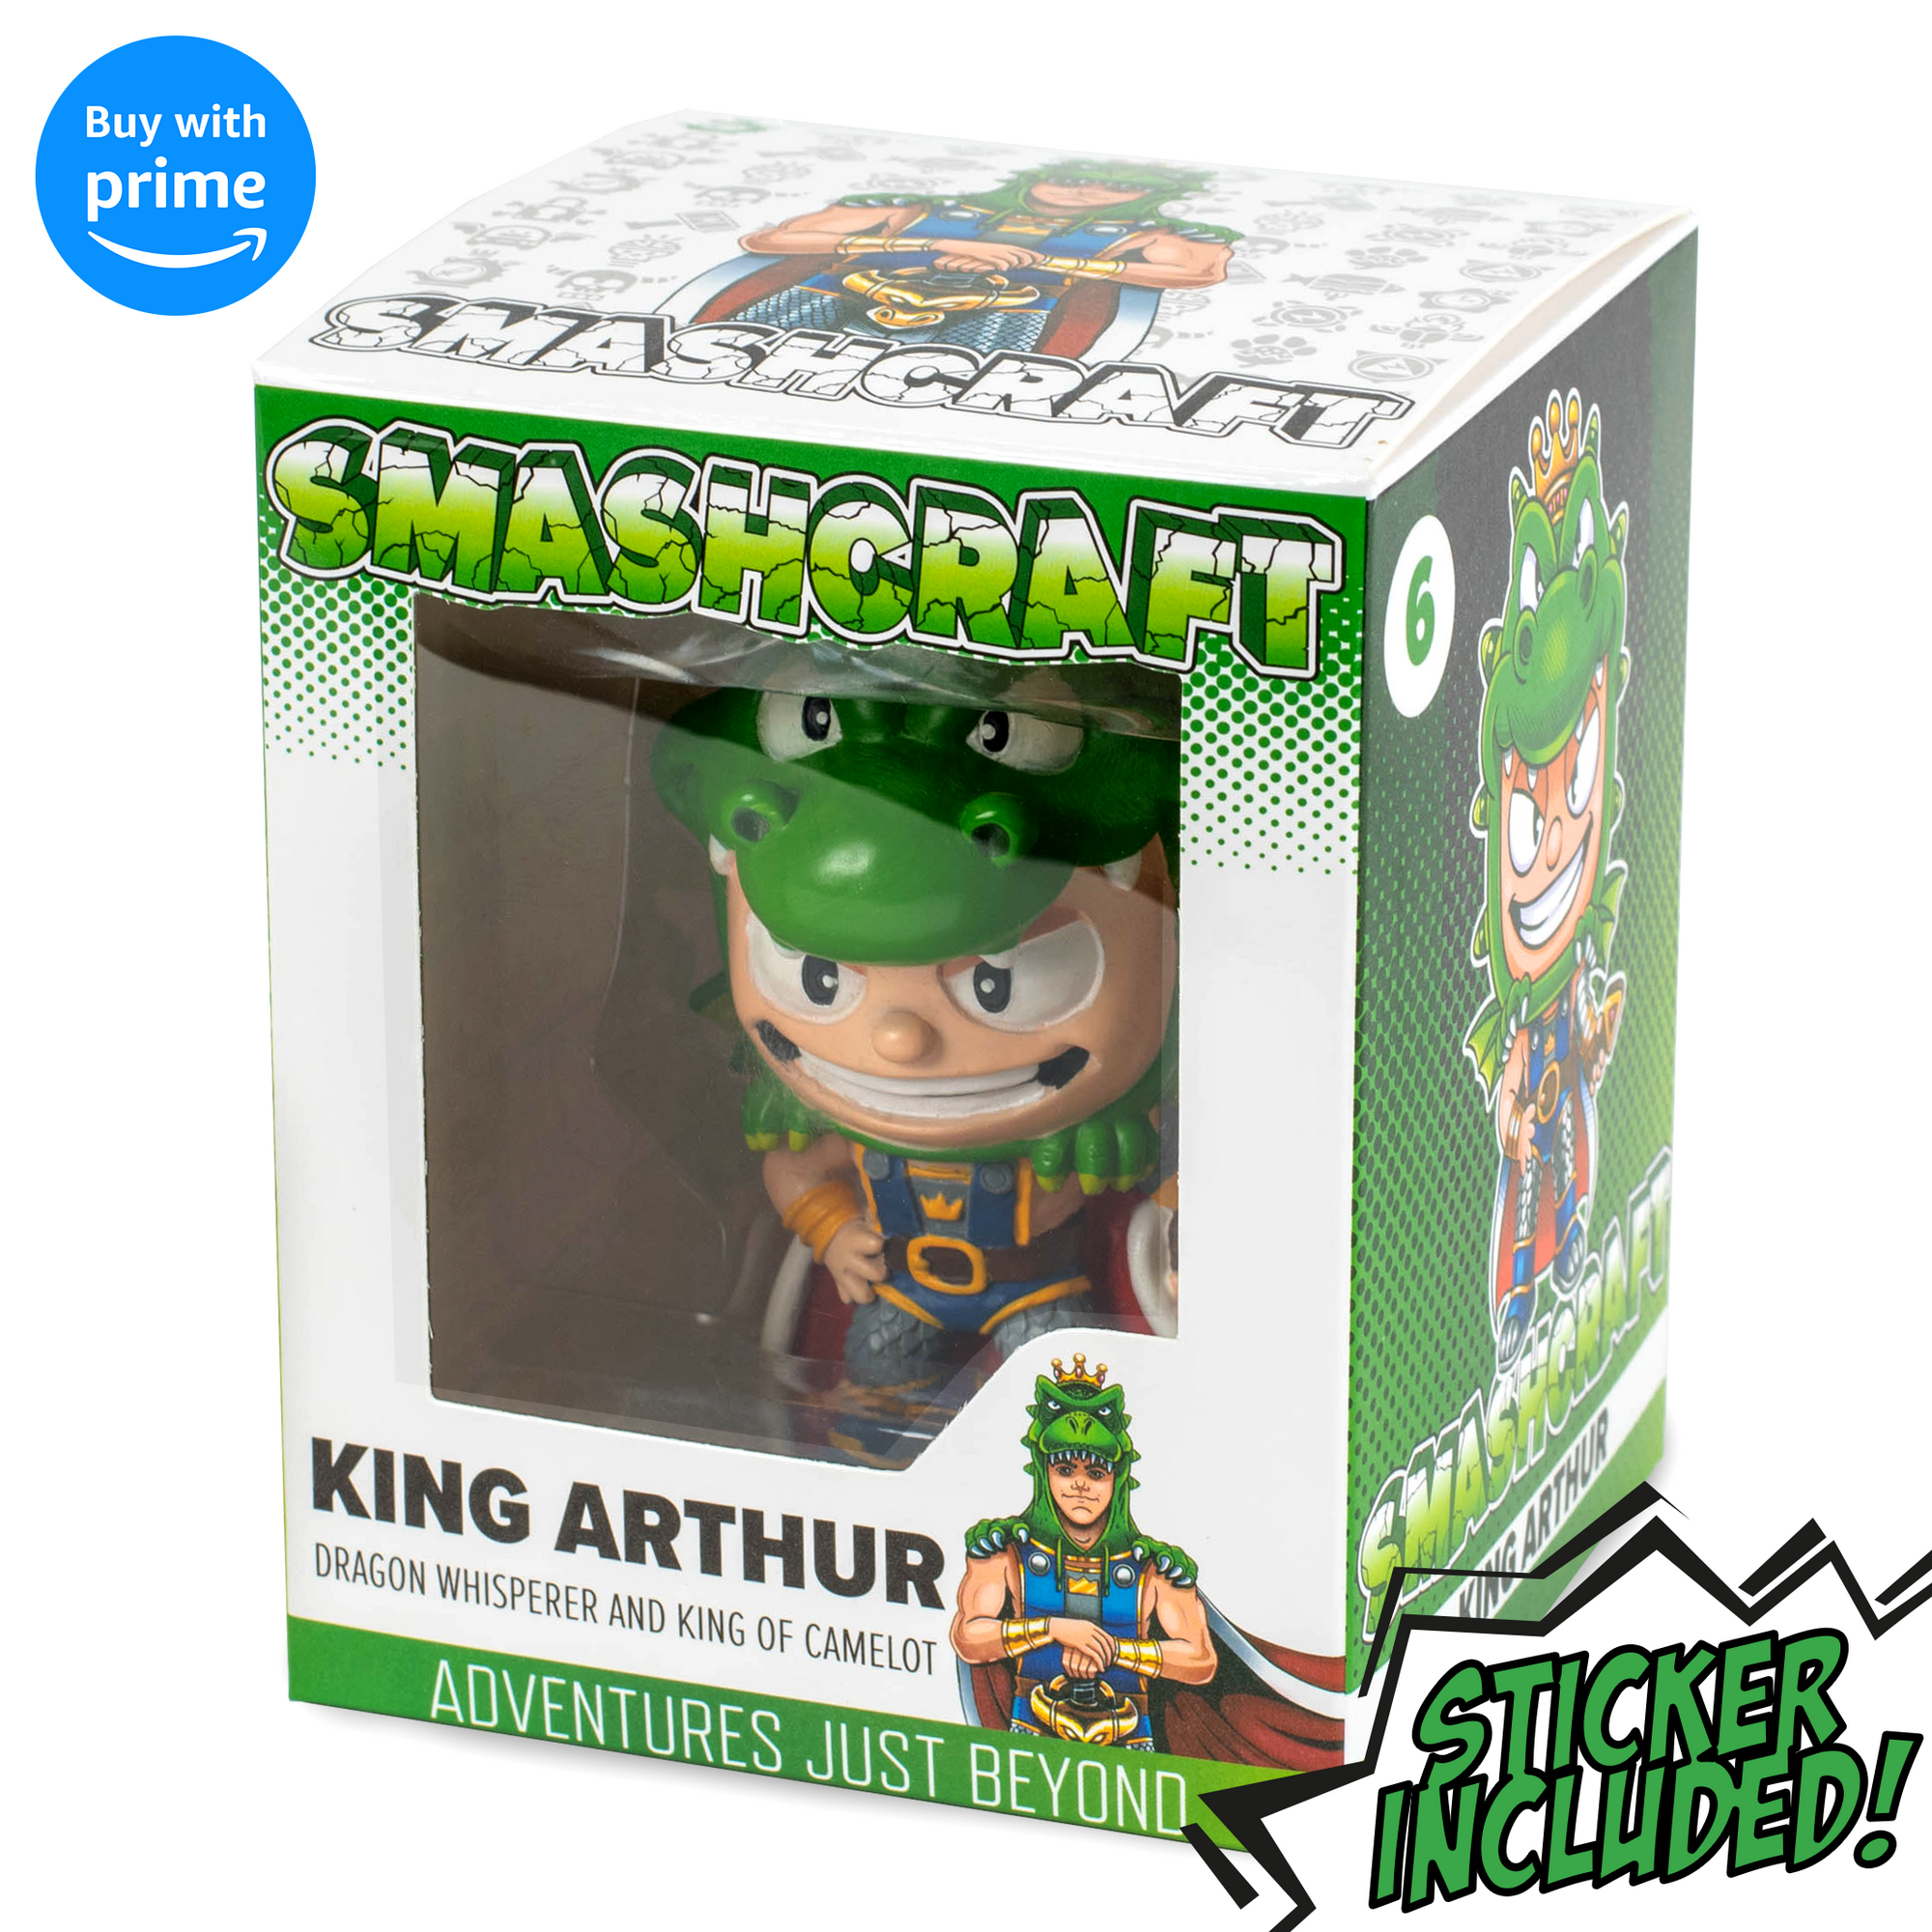 Smashcraft King Arthur Pendragon collectors box, with back story and memorabilia legend character sticker